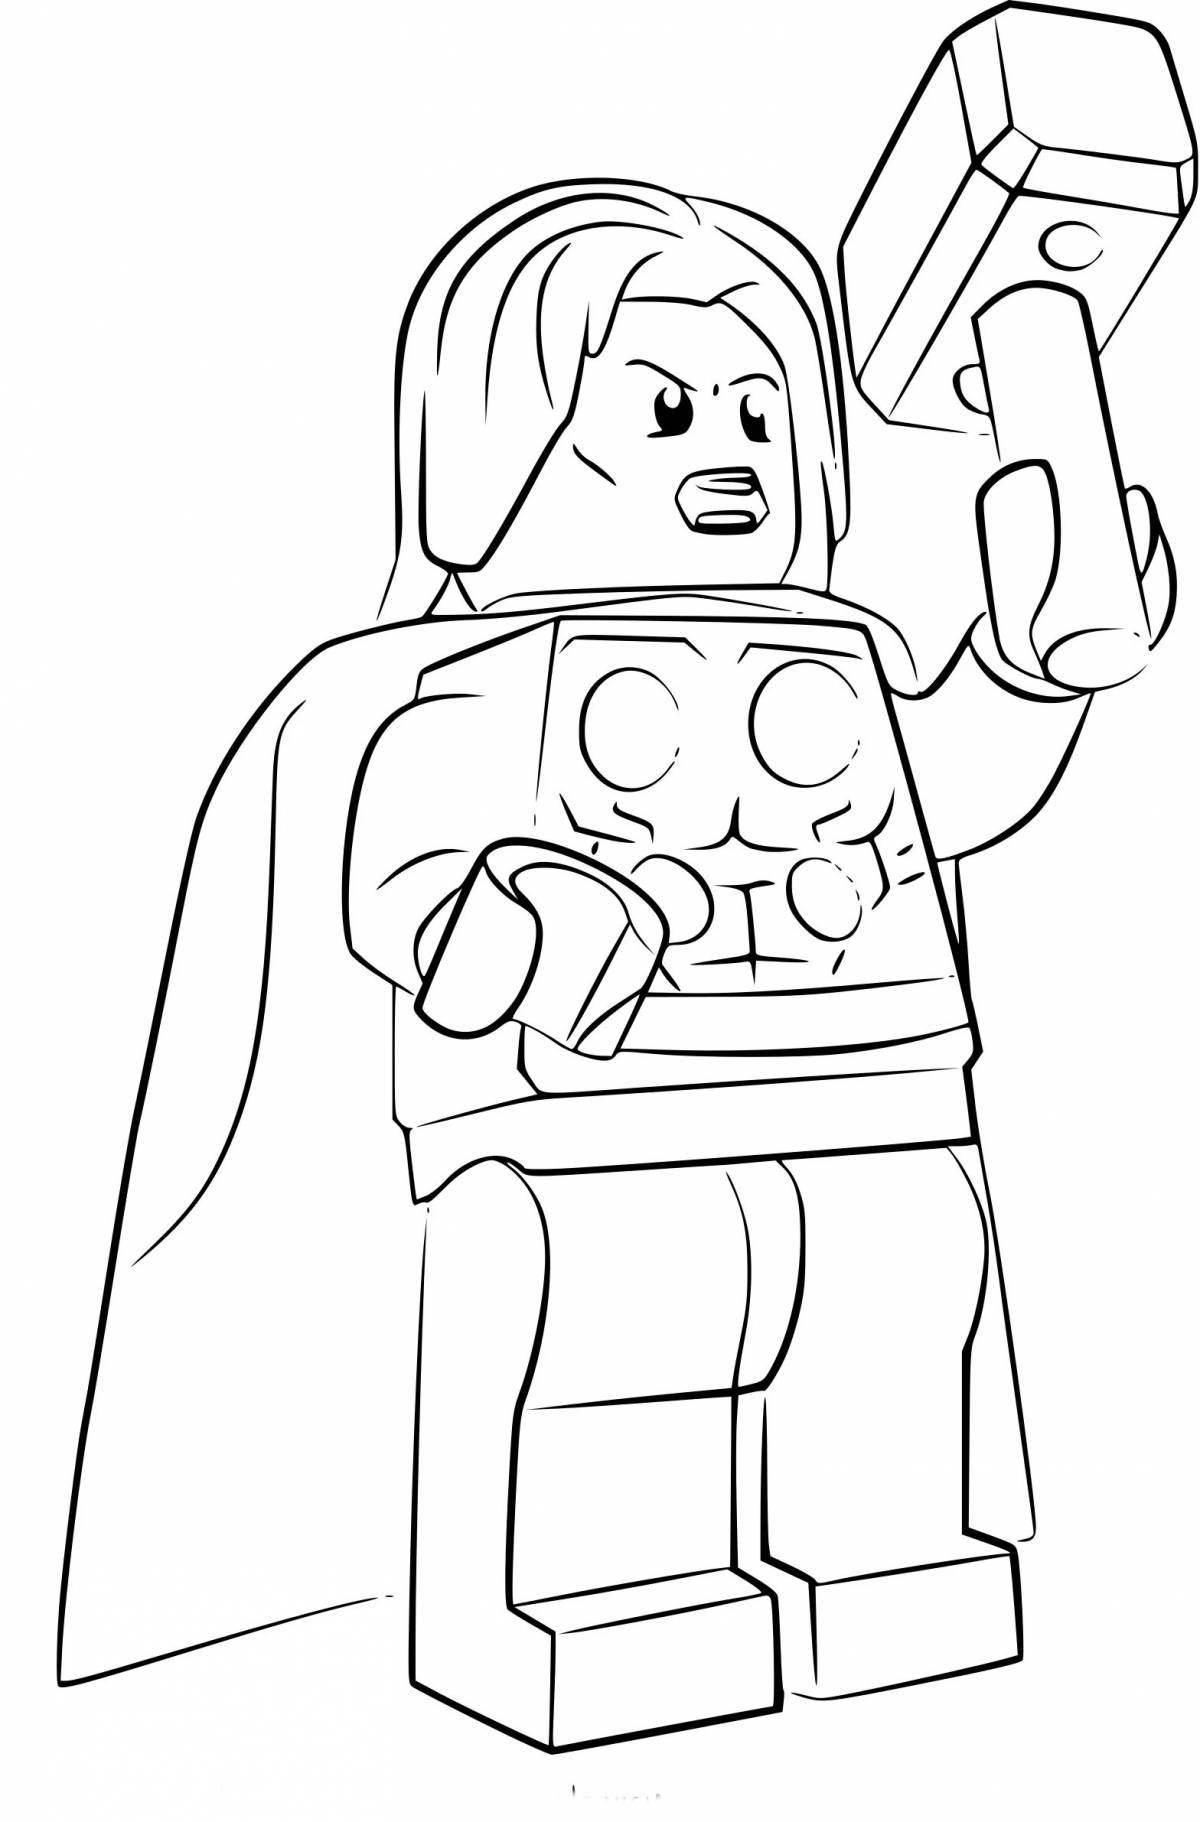 Bright lego thor coloring page